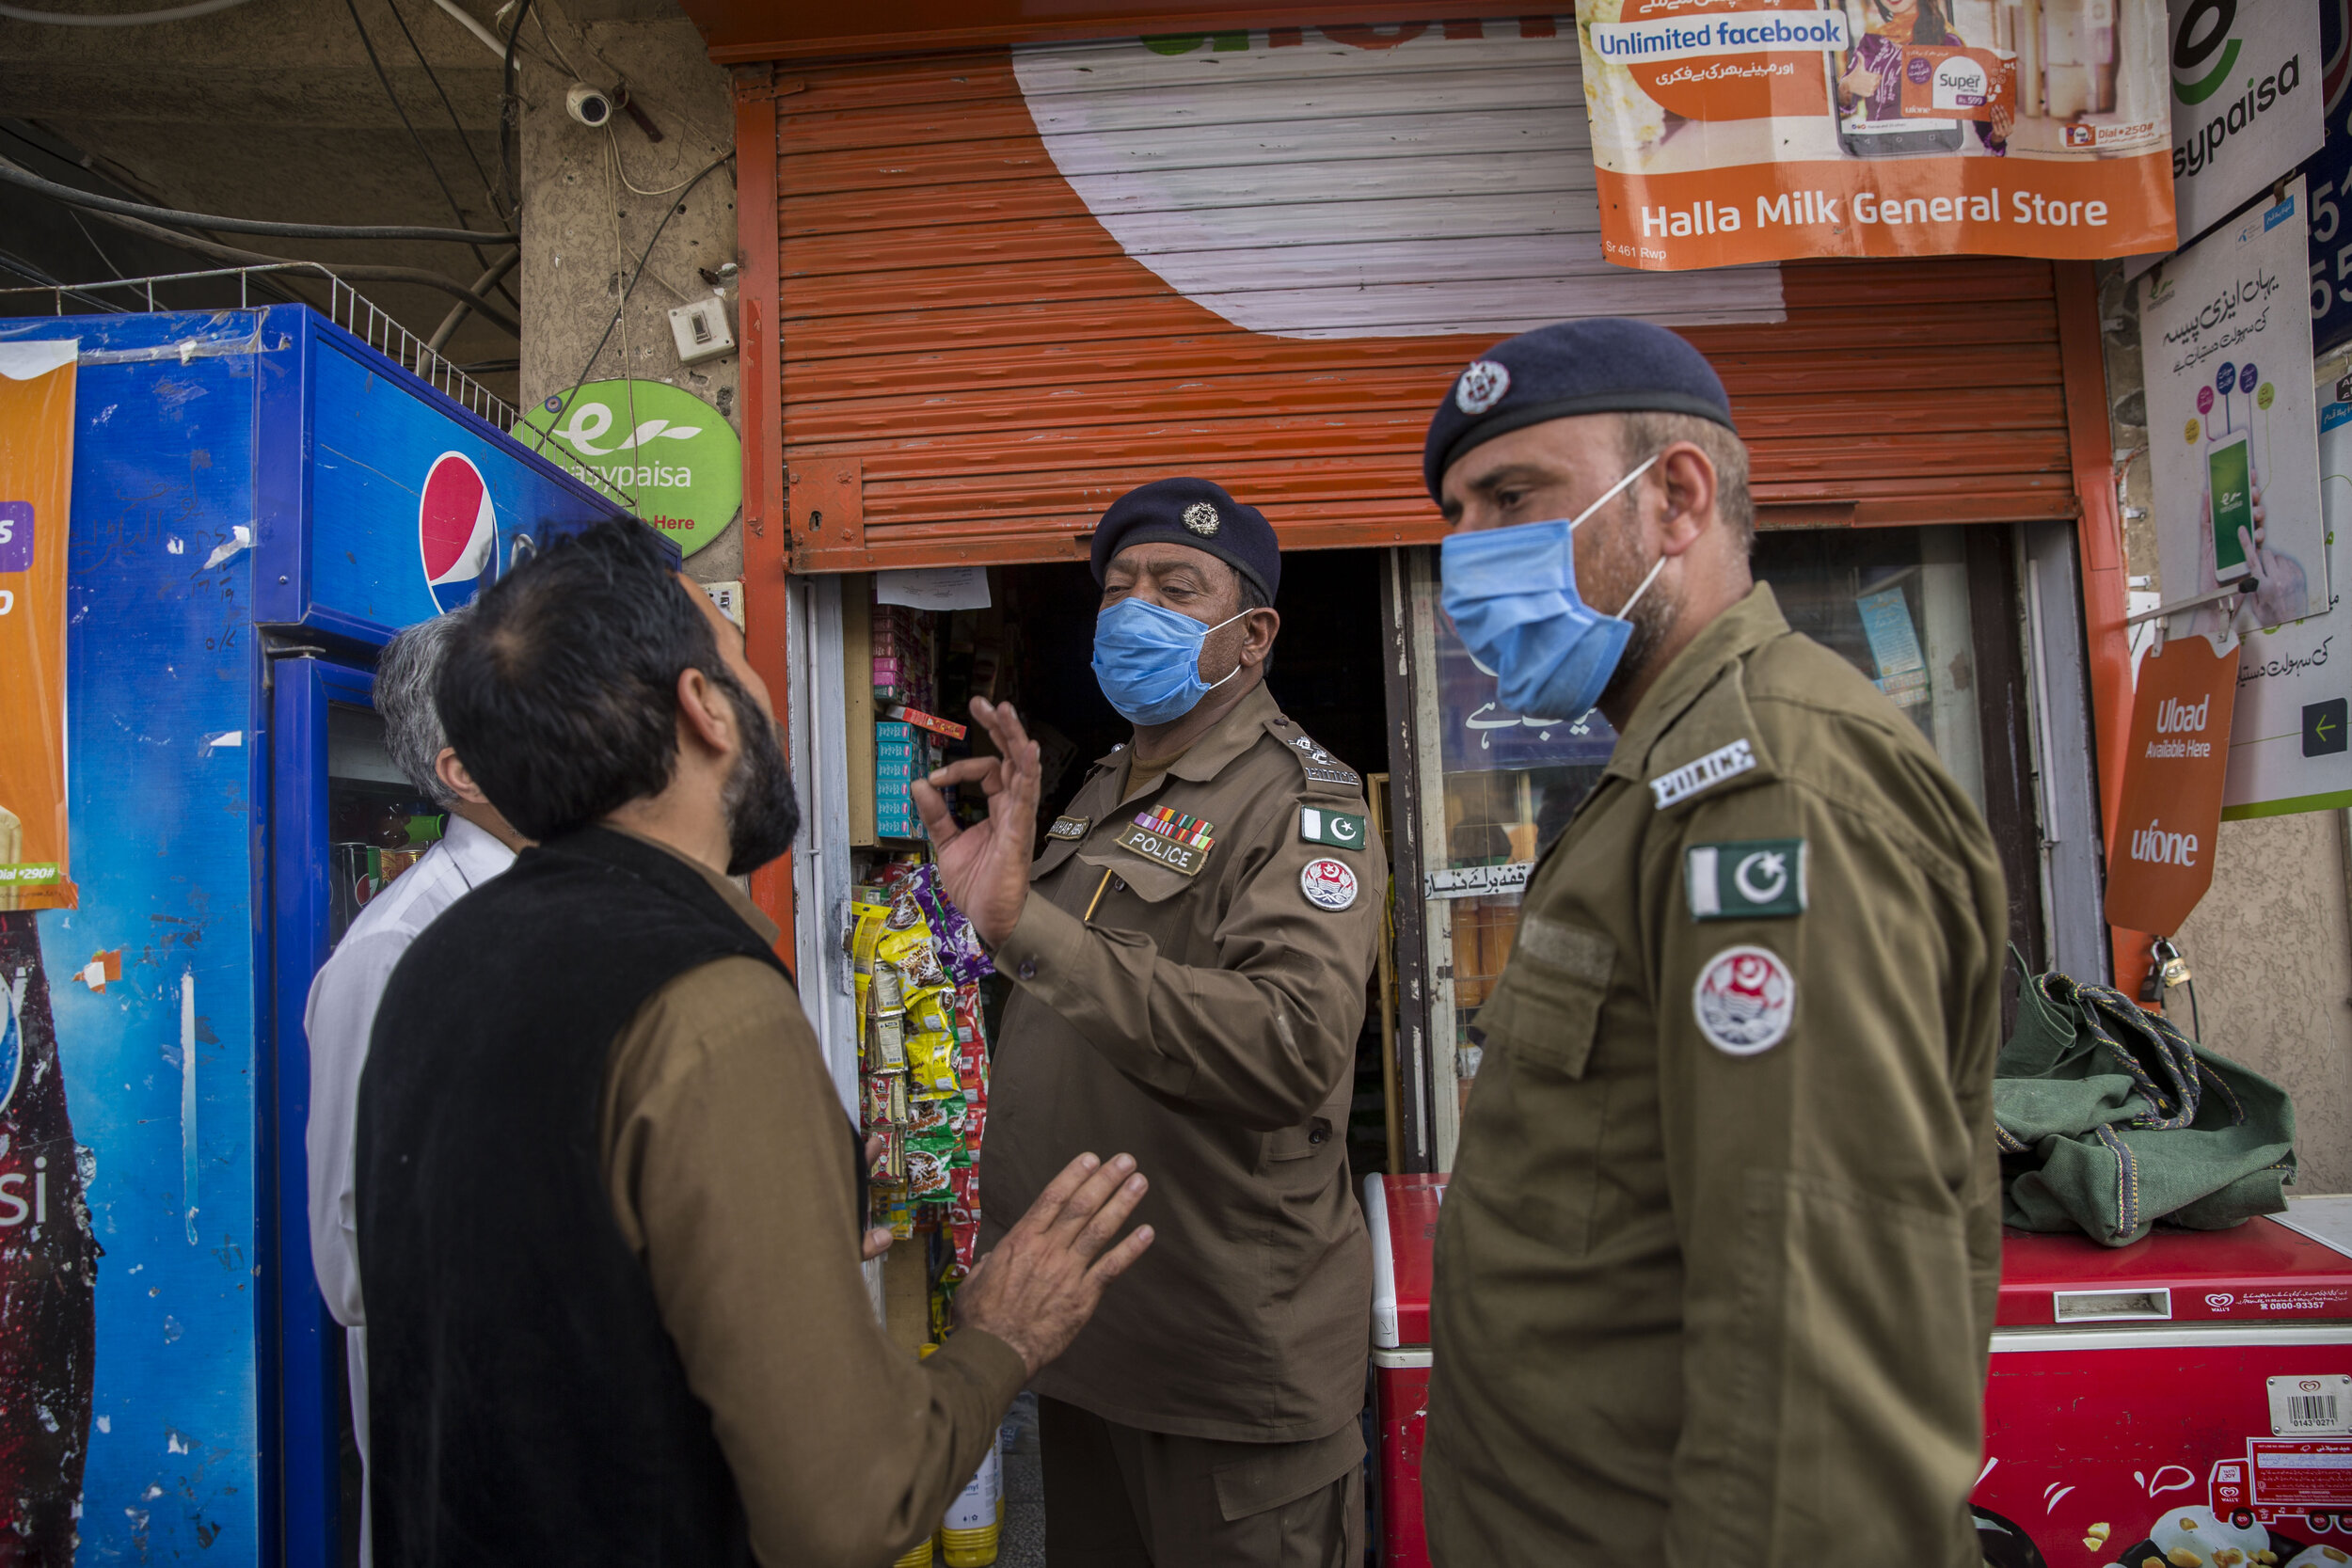  A police inspector tells the shopkeepers to close down and abide by the 5 p.m. curfew to shutdown during the lockdown. 